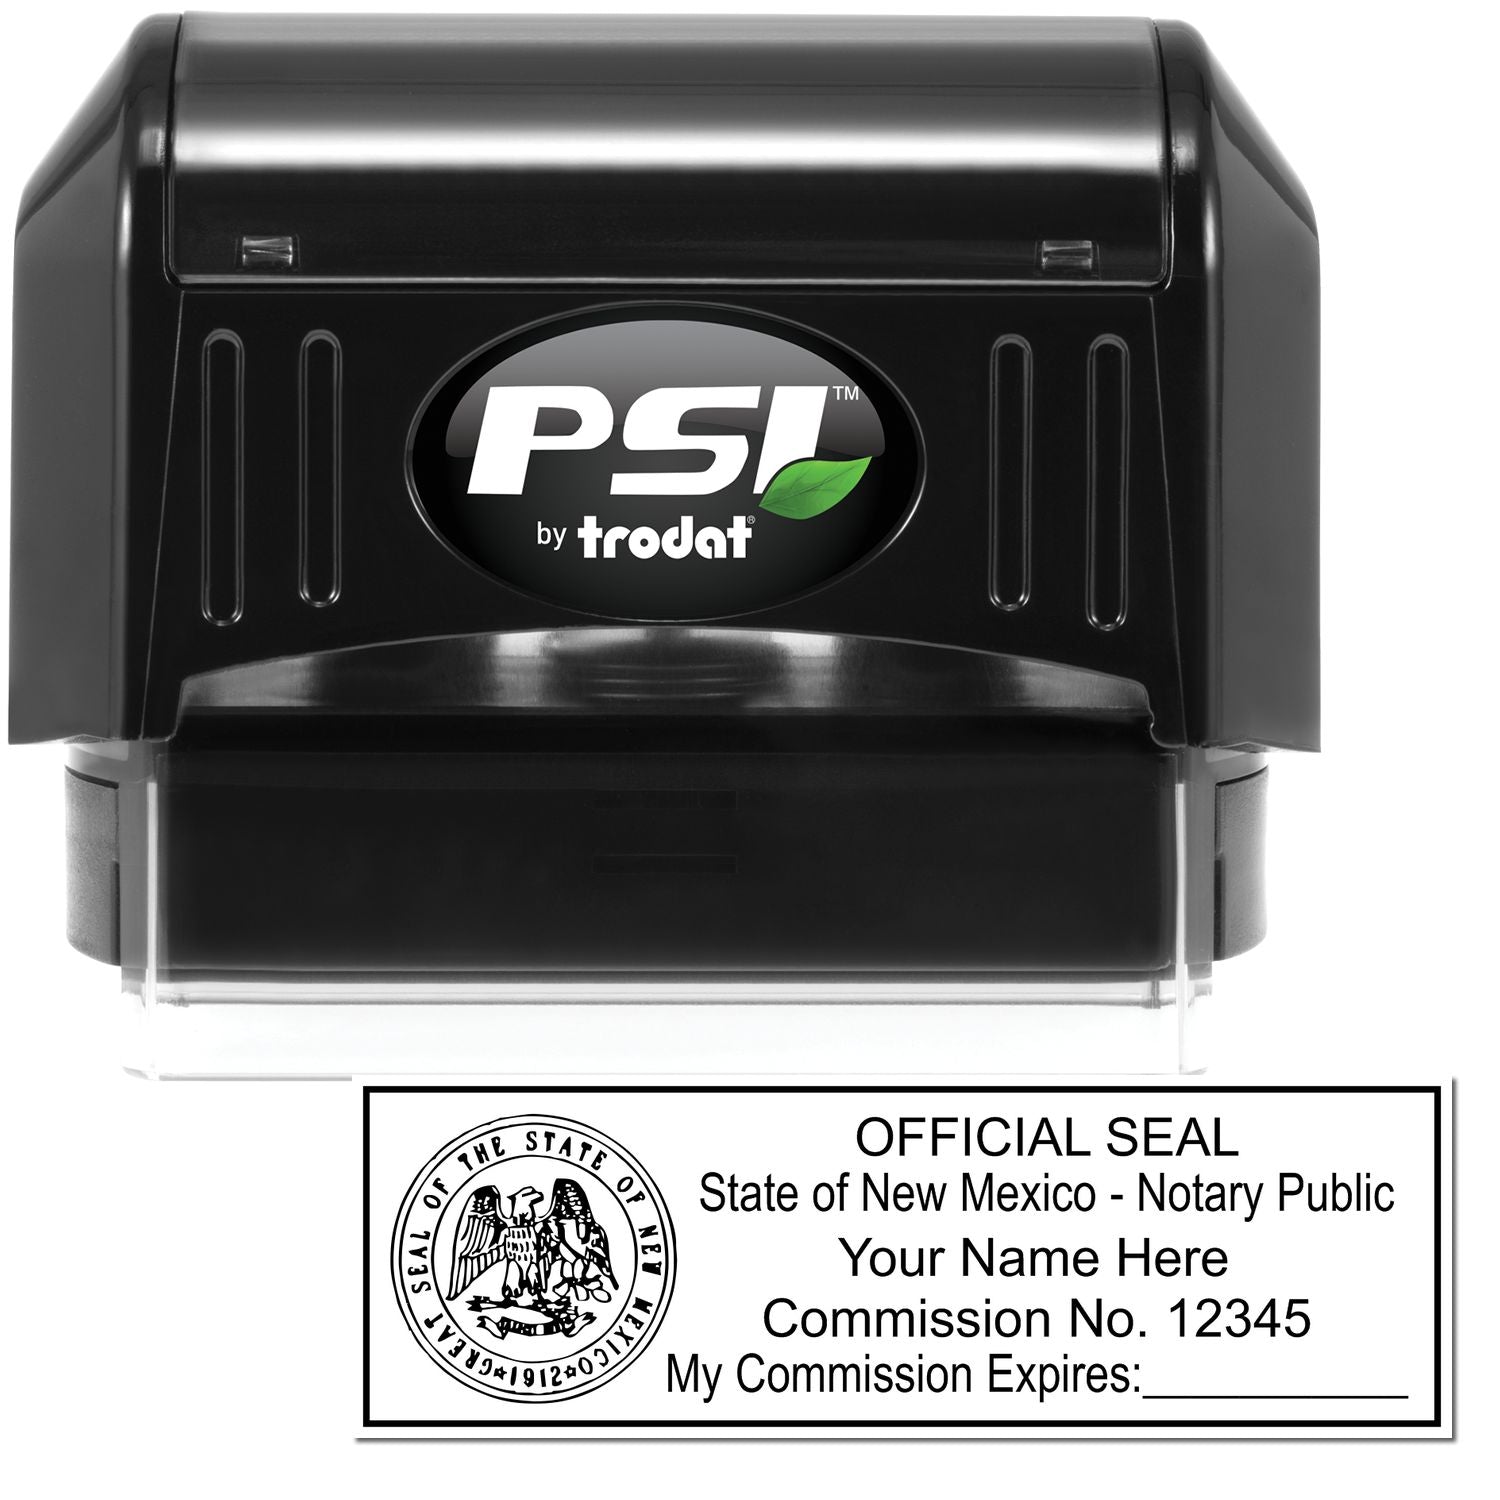 The main image for the PSI New Mexico Notary Stamp depicting a sample of the imprint and electronic files